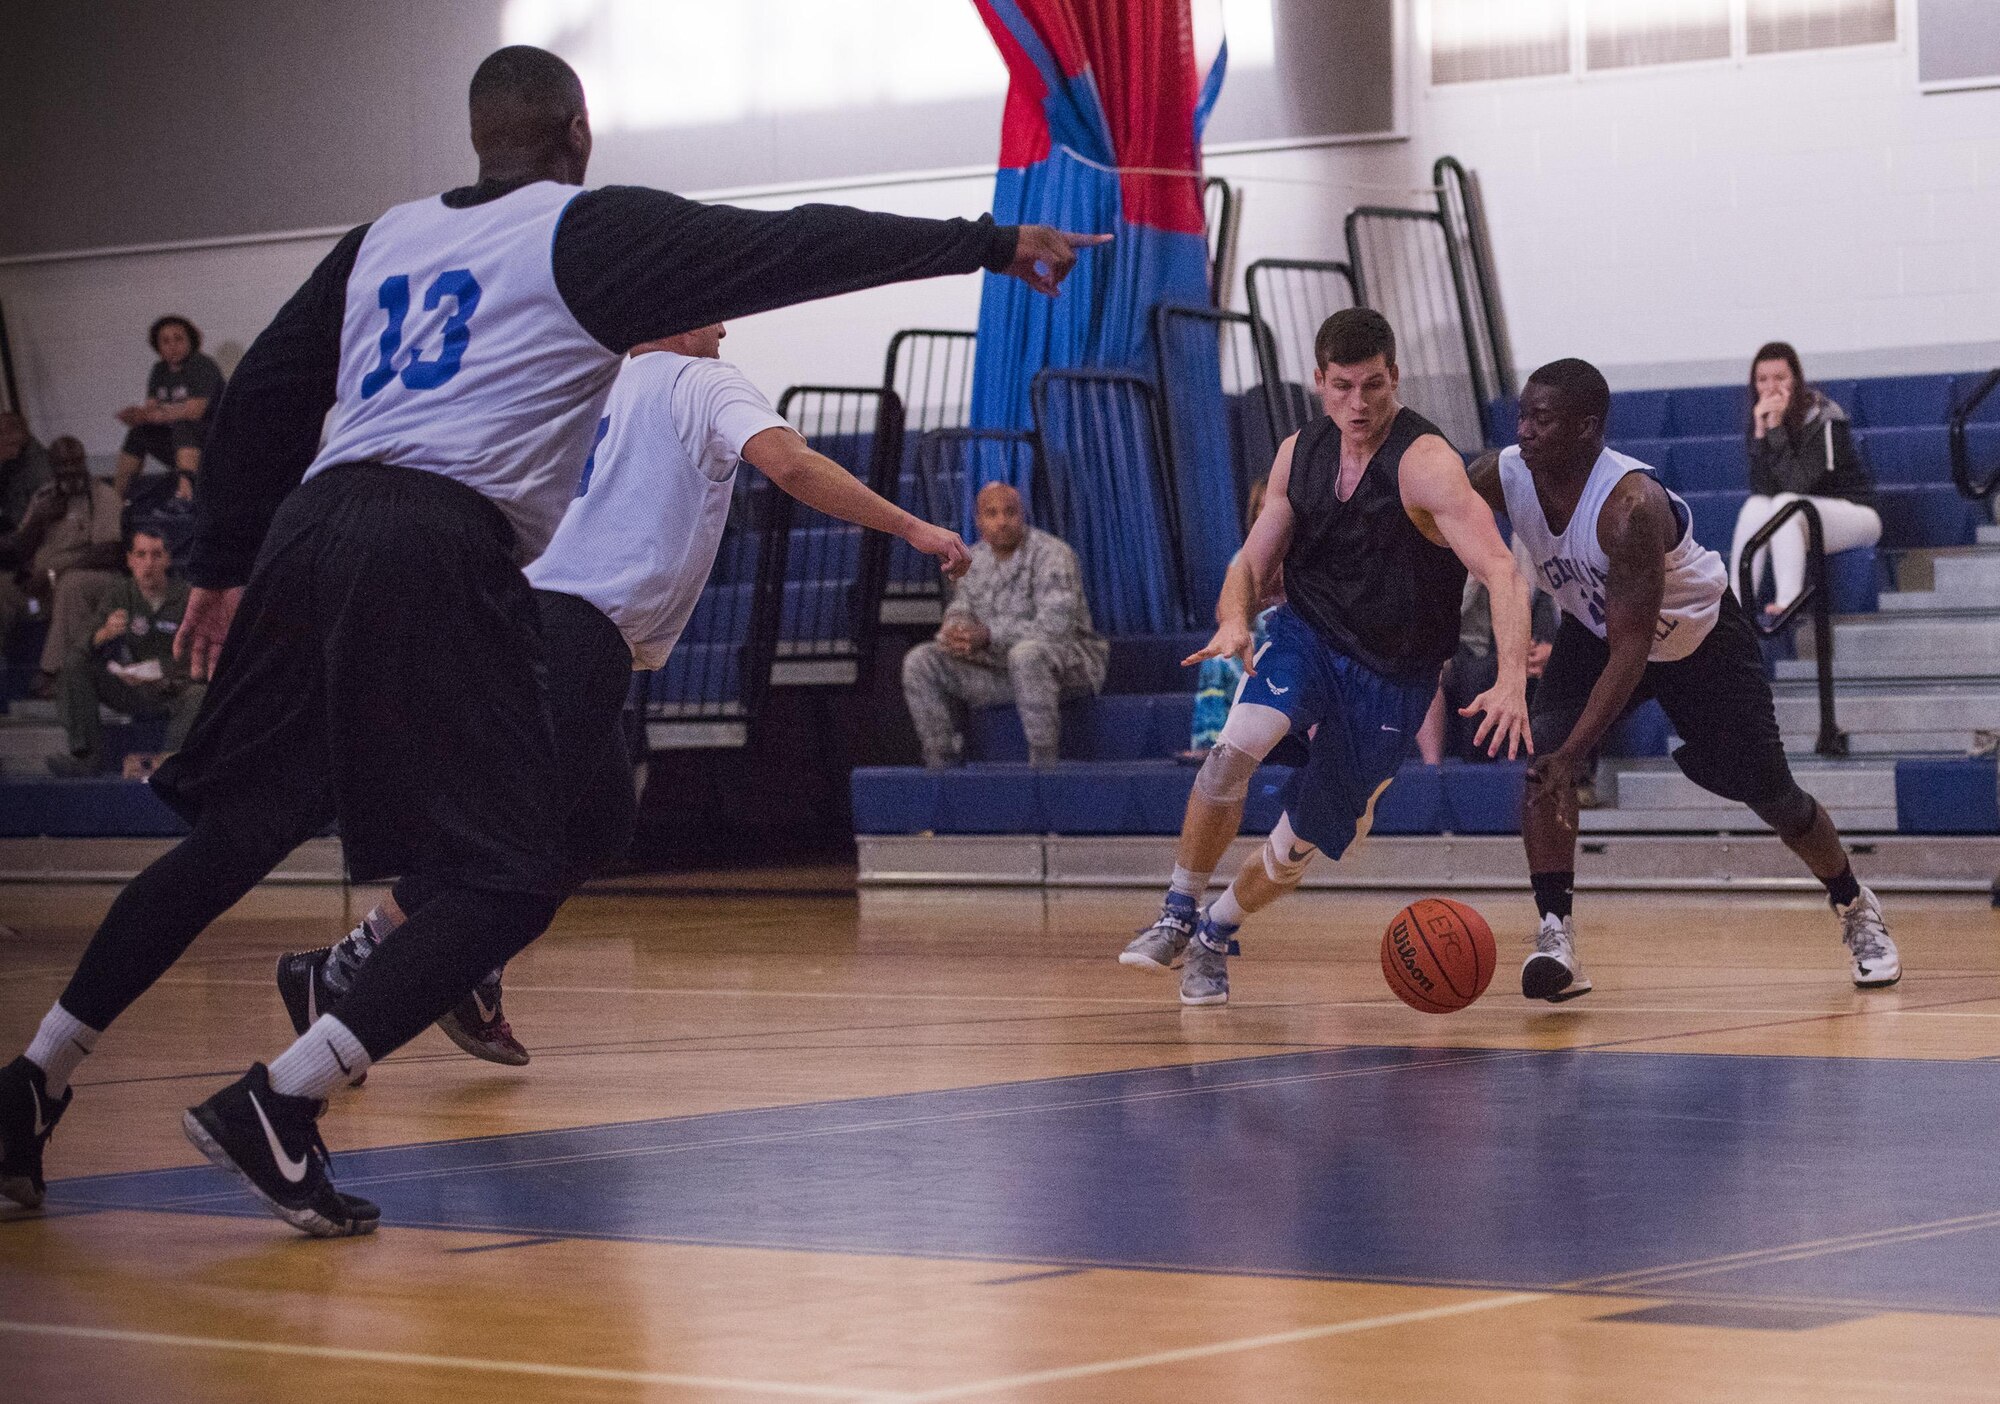 David Adler, Armament Directorate and a 53rd Wing competitor, race toward the ball during the intramural basketball championship March 6 at Eglin Air Force Base Fla. The EB team defeated the 53rd Wing team 53-42 to take the trophy. (U.S. Air Force photo/Ilka Cole) 